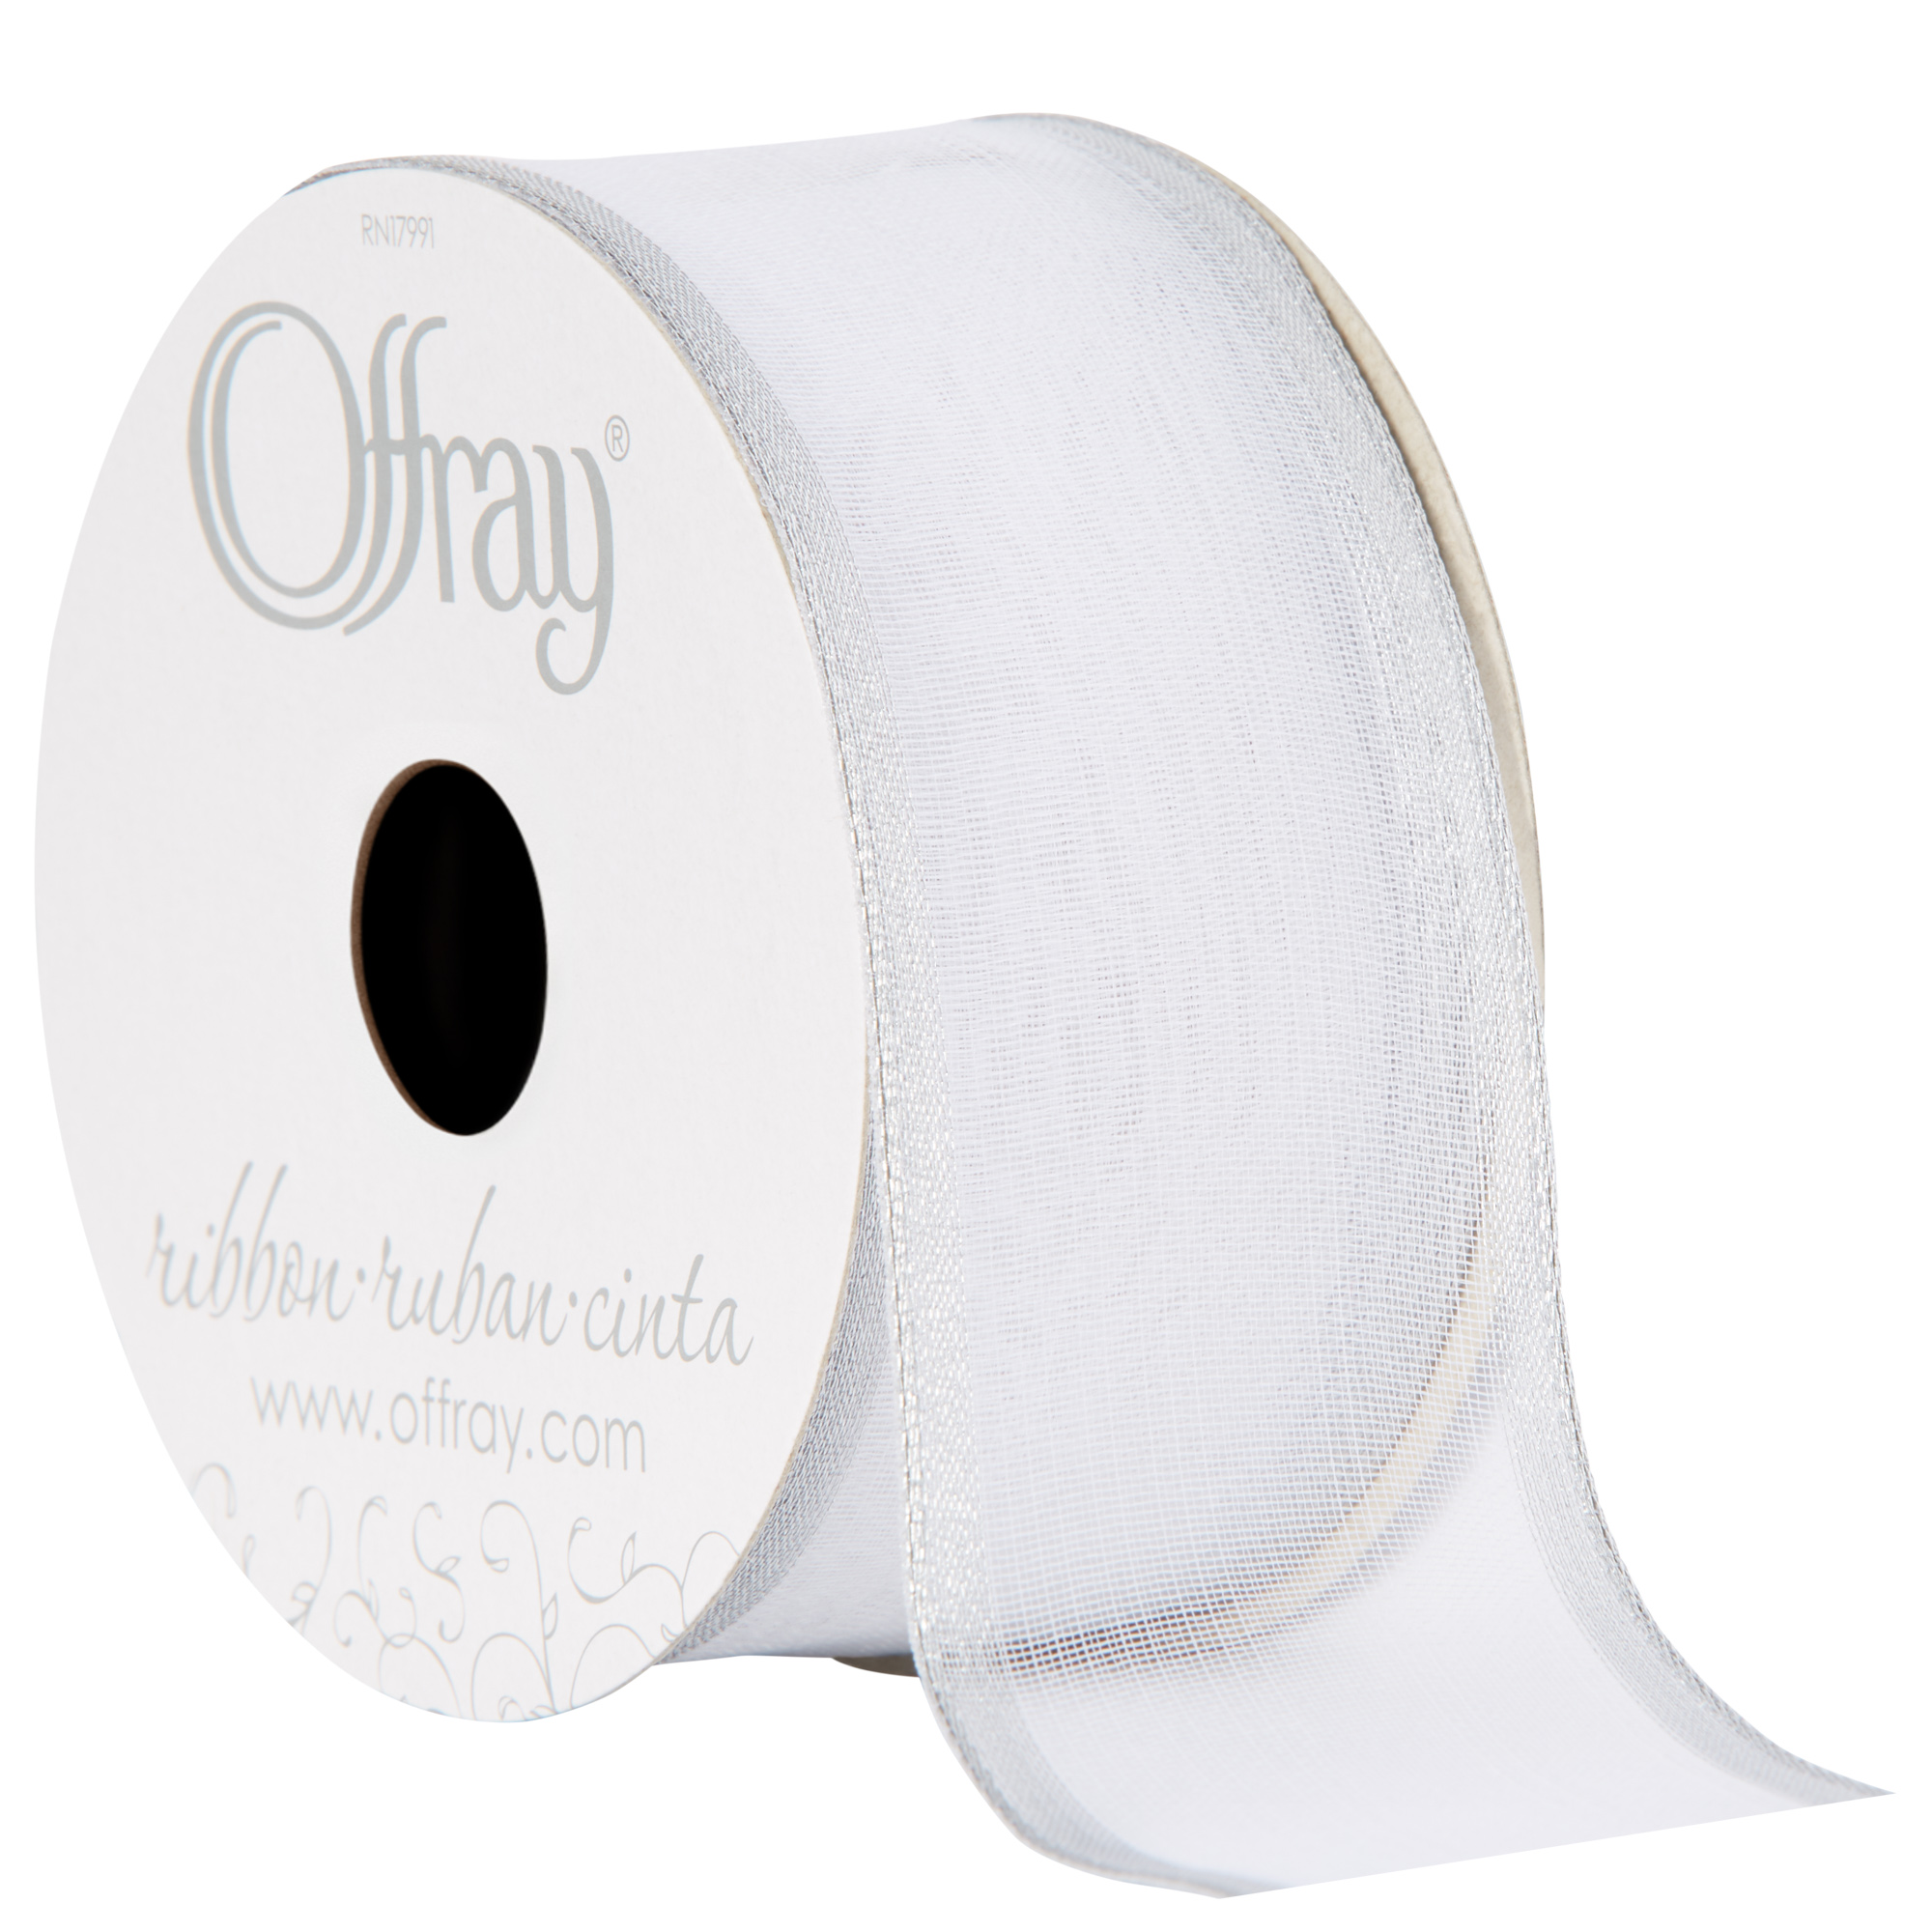 Offray Woven Brushed Sheer Wired Ribbon-Silver